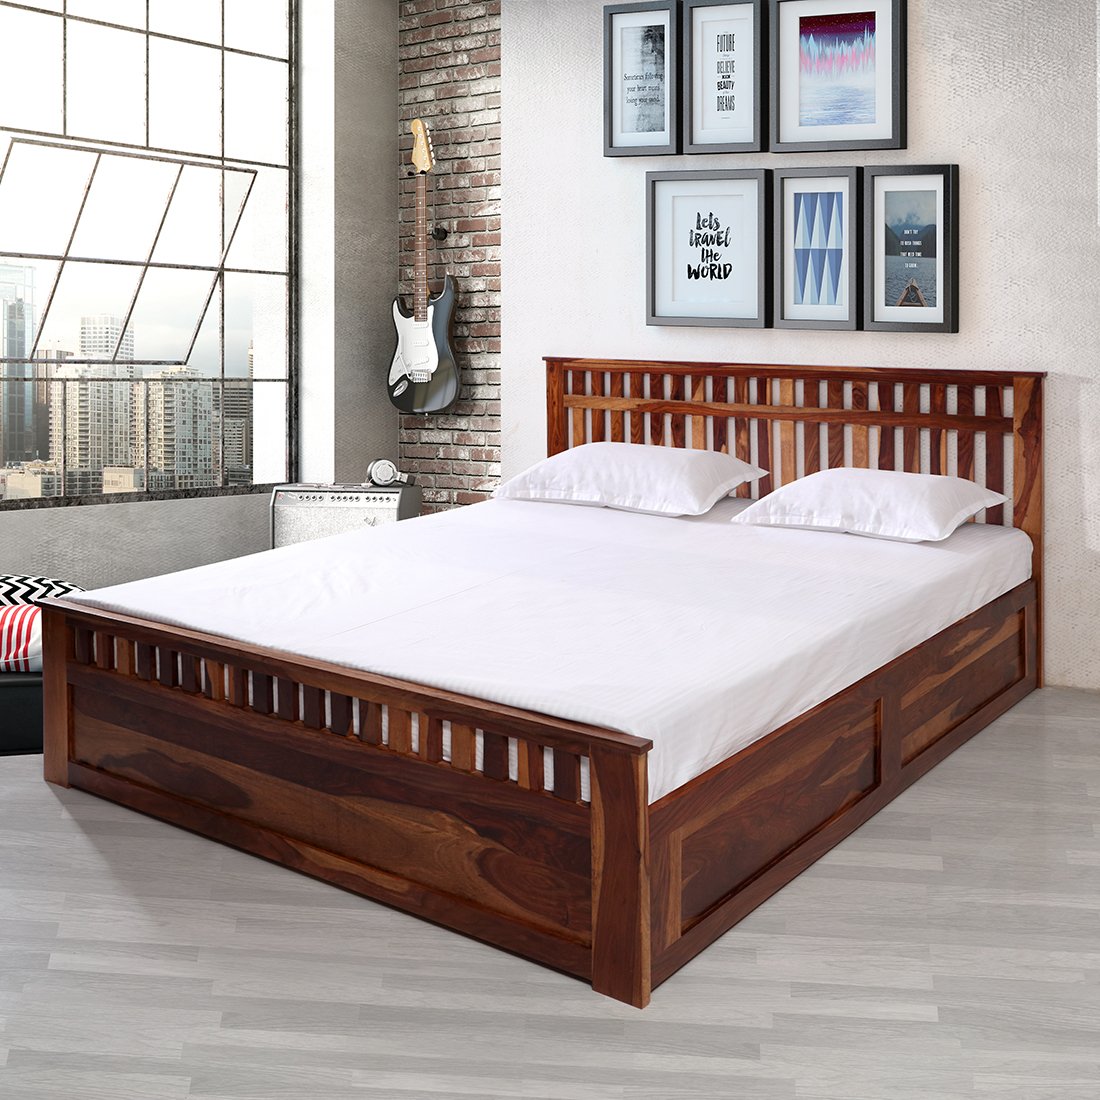 Beatrice Solidwood King Bed Box, King Bed Box